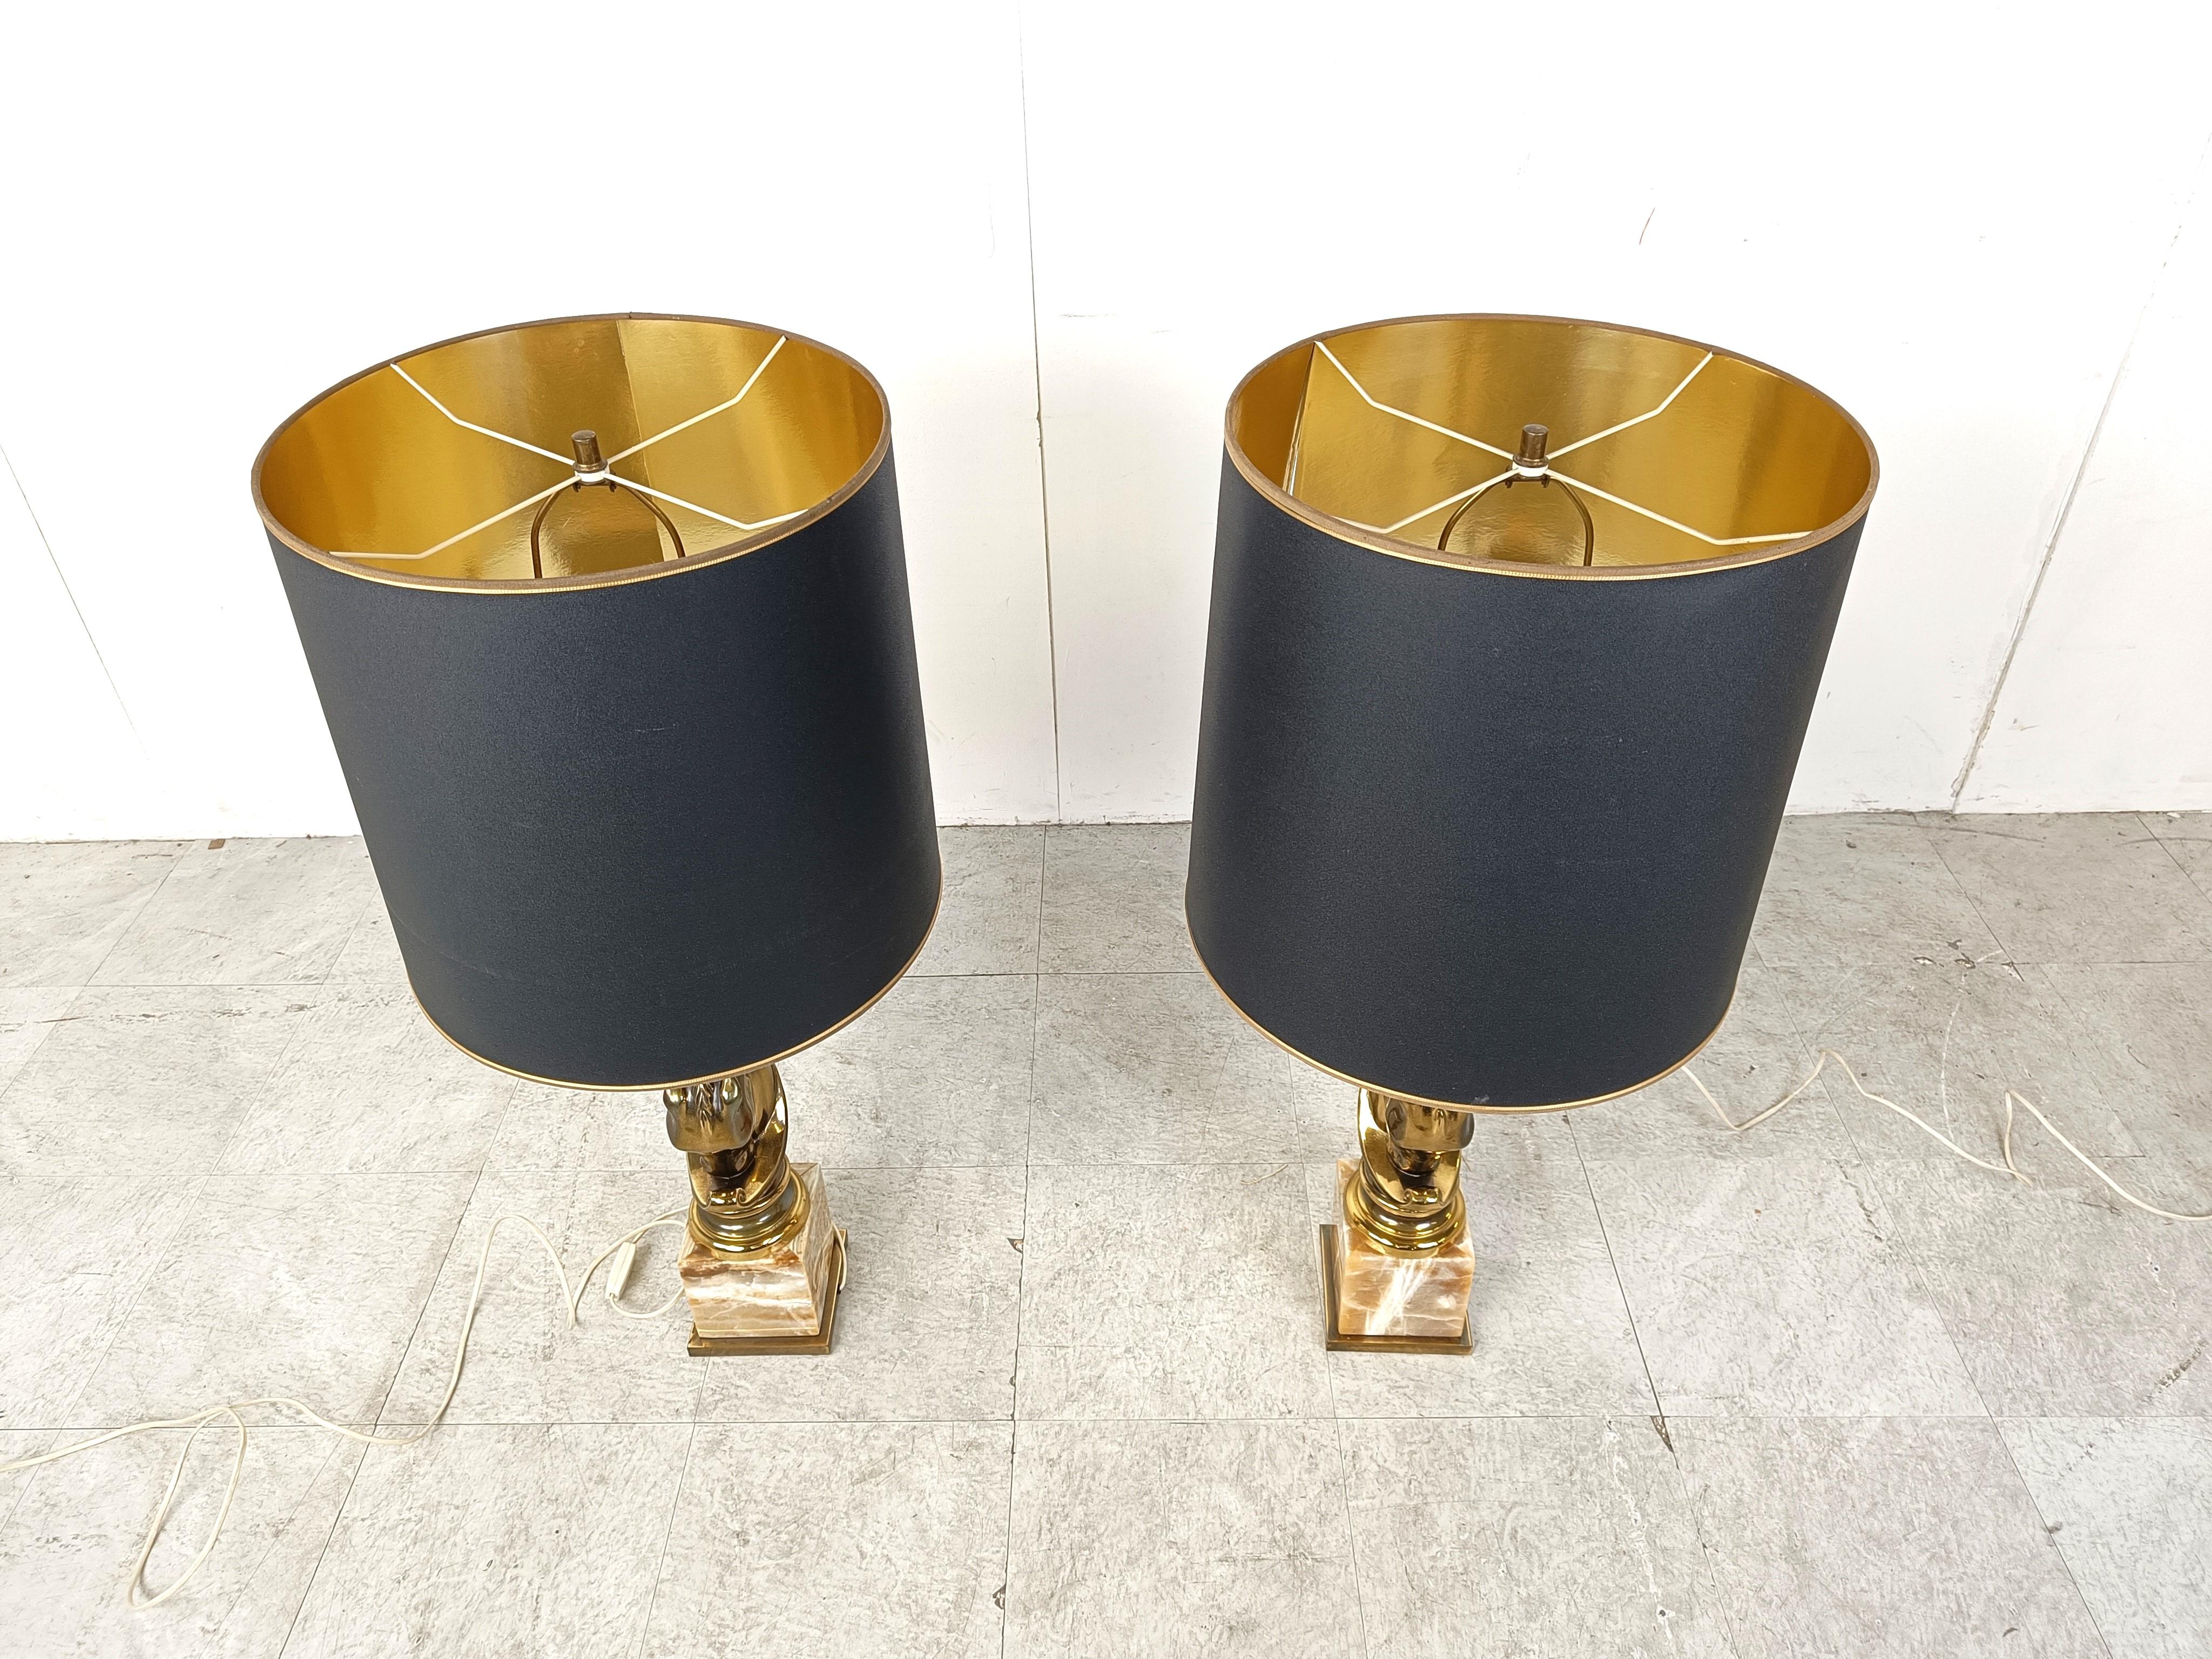 Pair of vintage horse head table lamps from Deknudt.

Hollywood regency style.

Made out of 24kt gold plated metal and onyx marble bases.

To be used with a regular E27 light bulb.

Beautiful cylindrical lamp shades with a gold finish on the